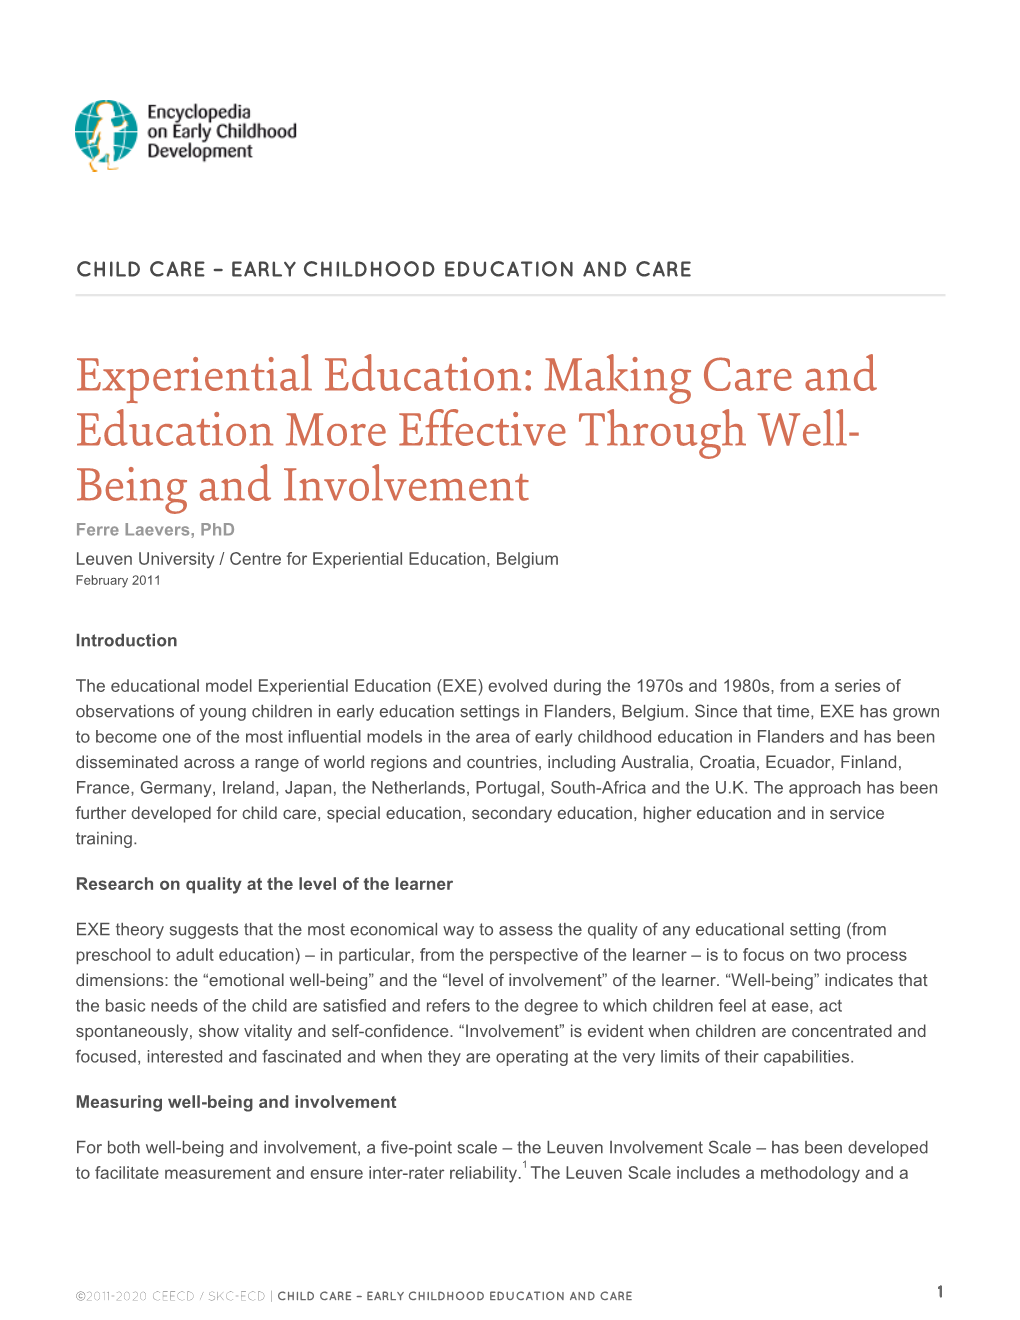 Making Care and Education More Effective Through Well- Being And